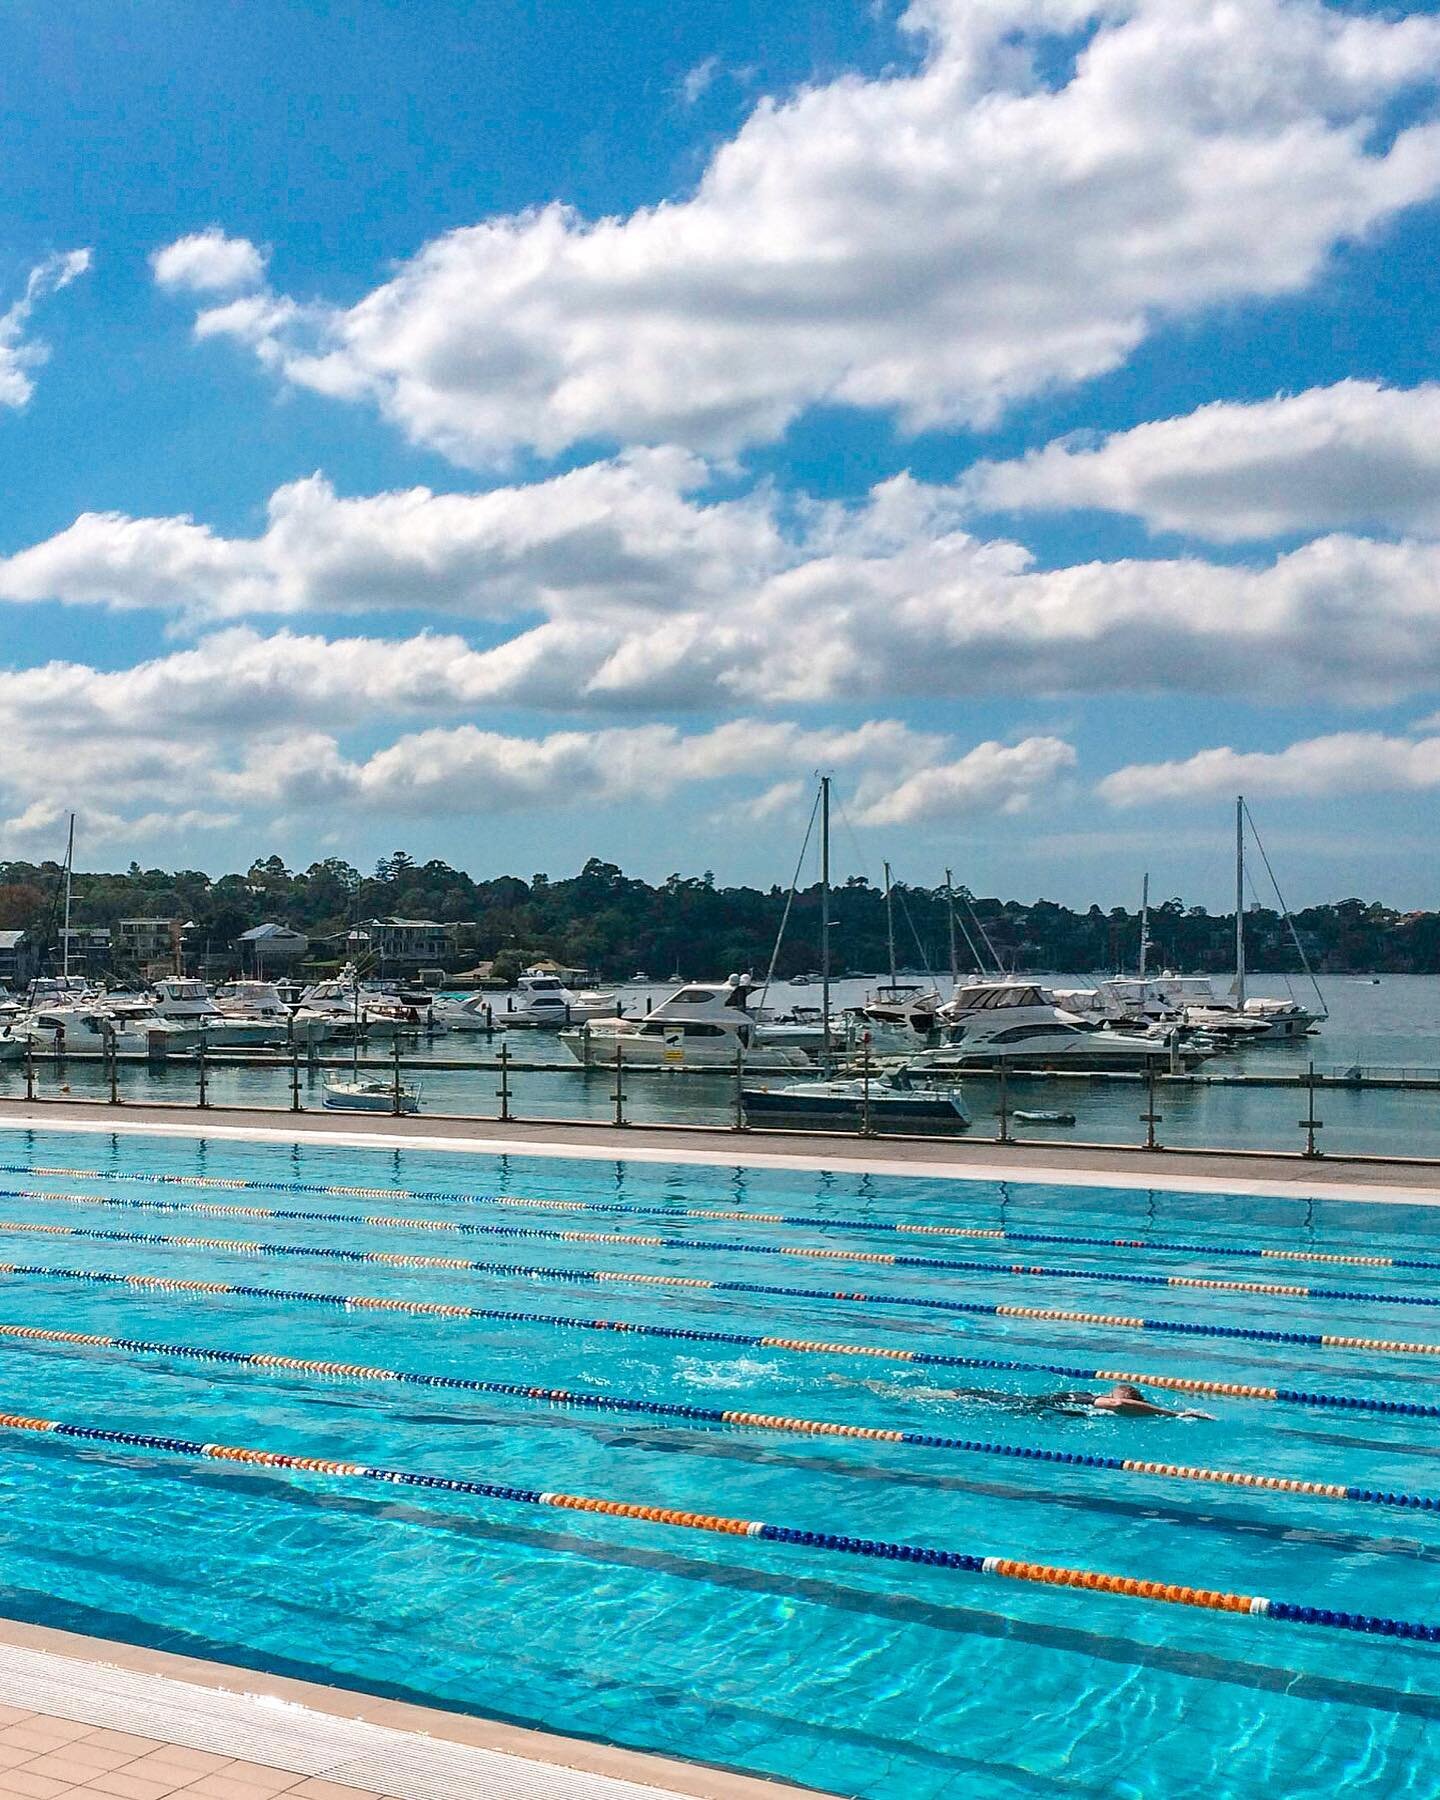 Cabarita Swimming Centre located in Concord, New South Wales is a beautiful aquatic facility overlooking the Parramatta River, perfect for the morning swim 🏊&zwj;♂️ 🧘&zwj;♀️ Who else is in love with Australian outdoor pools? 😍
.
.
#swimvenue
#swim